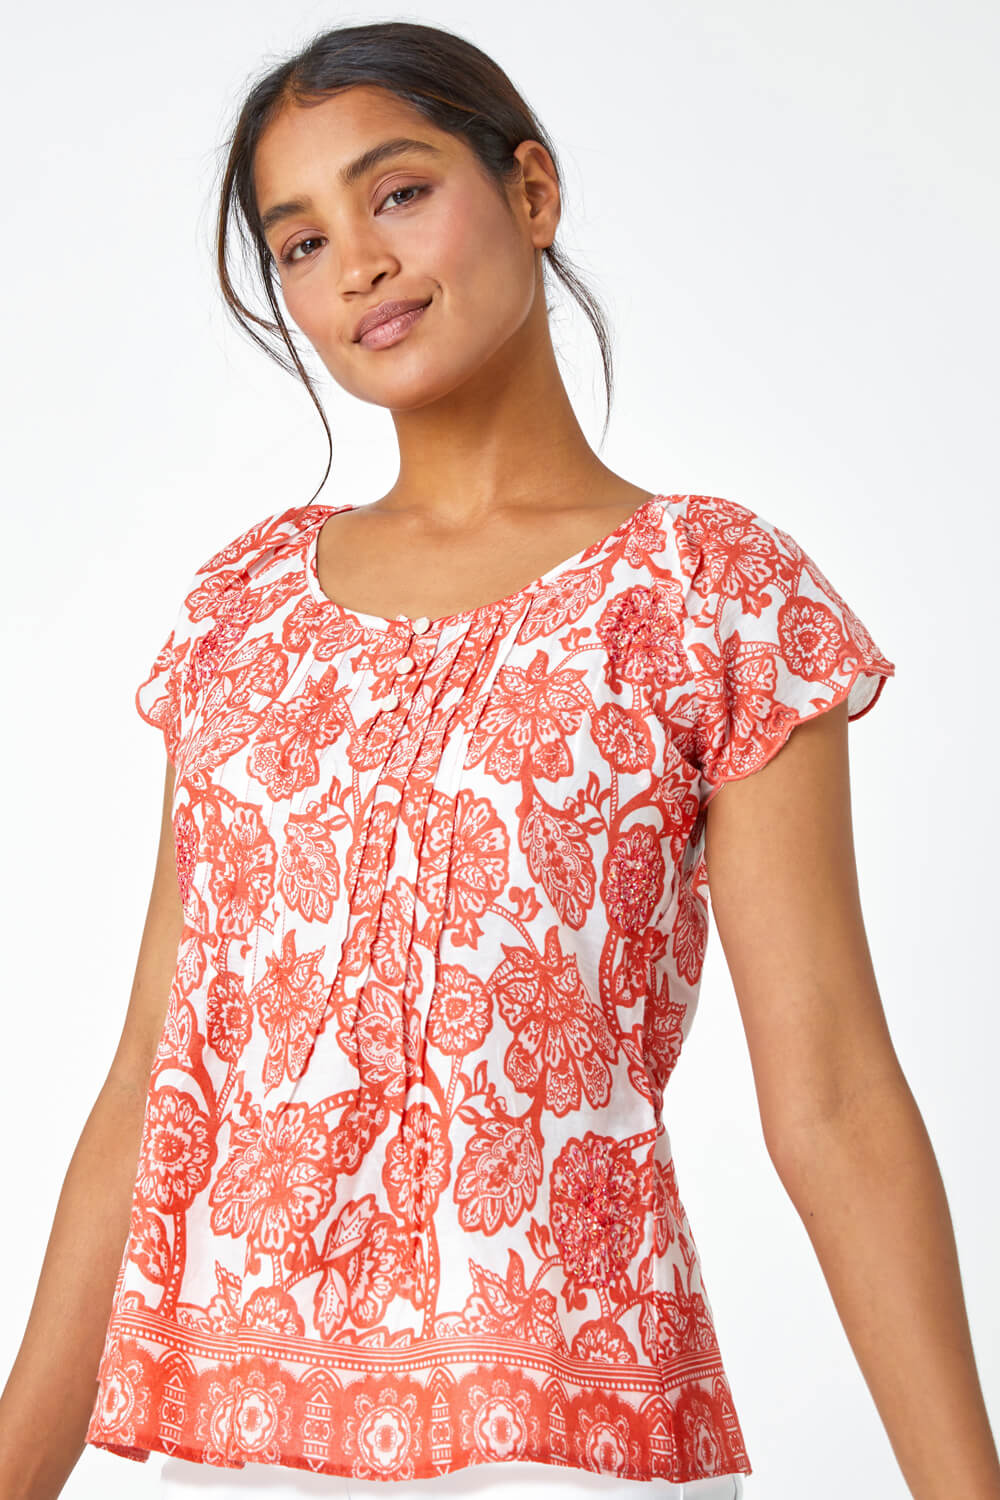 CORAL Floral Print Cotton Top, Image 2 of 5